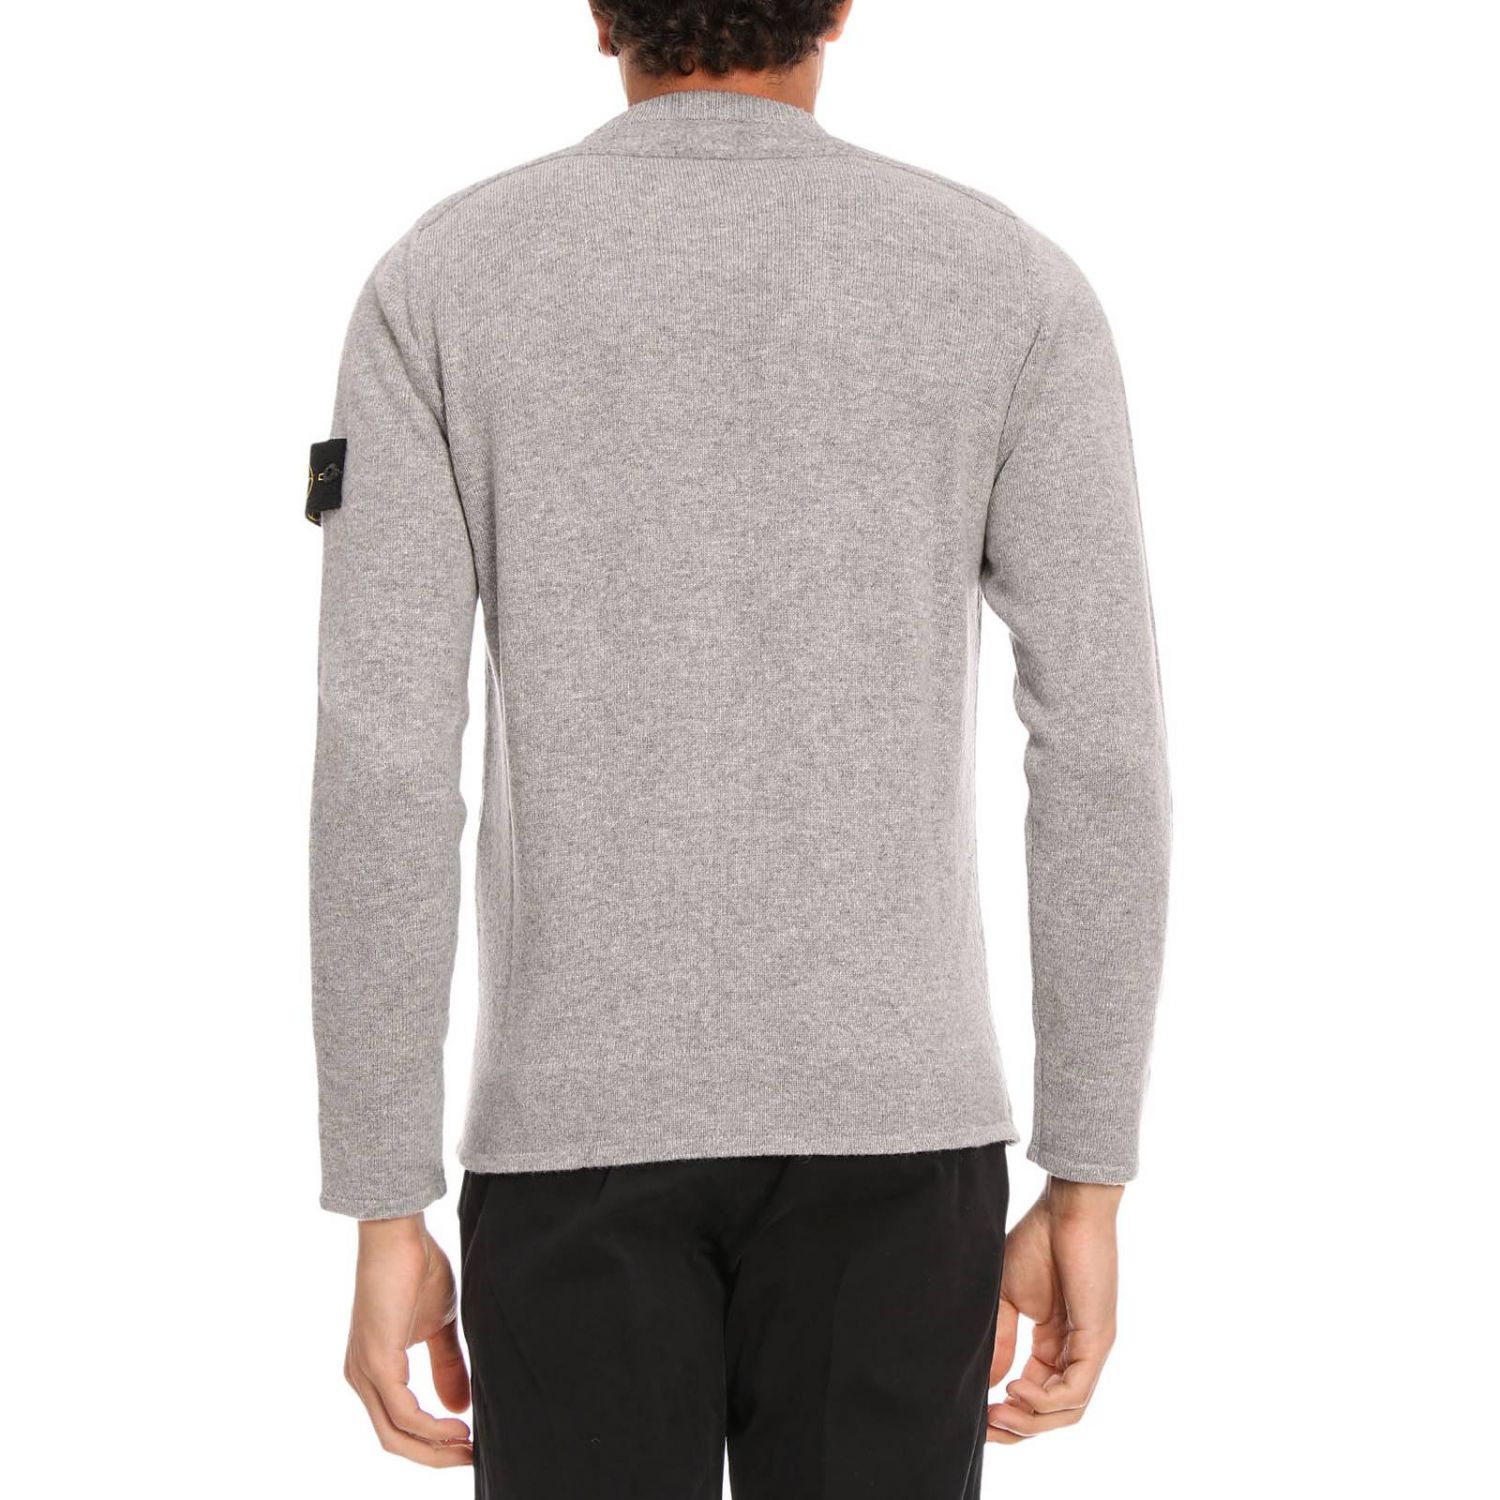 Stone Island Outlet: Sweater men - Grey | Sweater Stone Island 541A3 ...